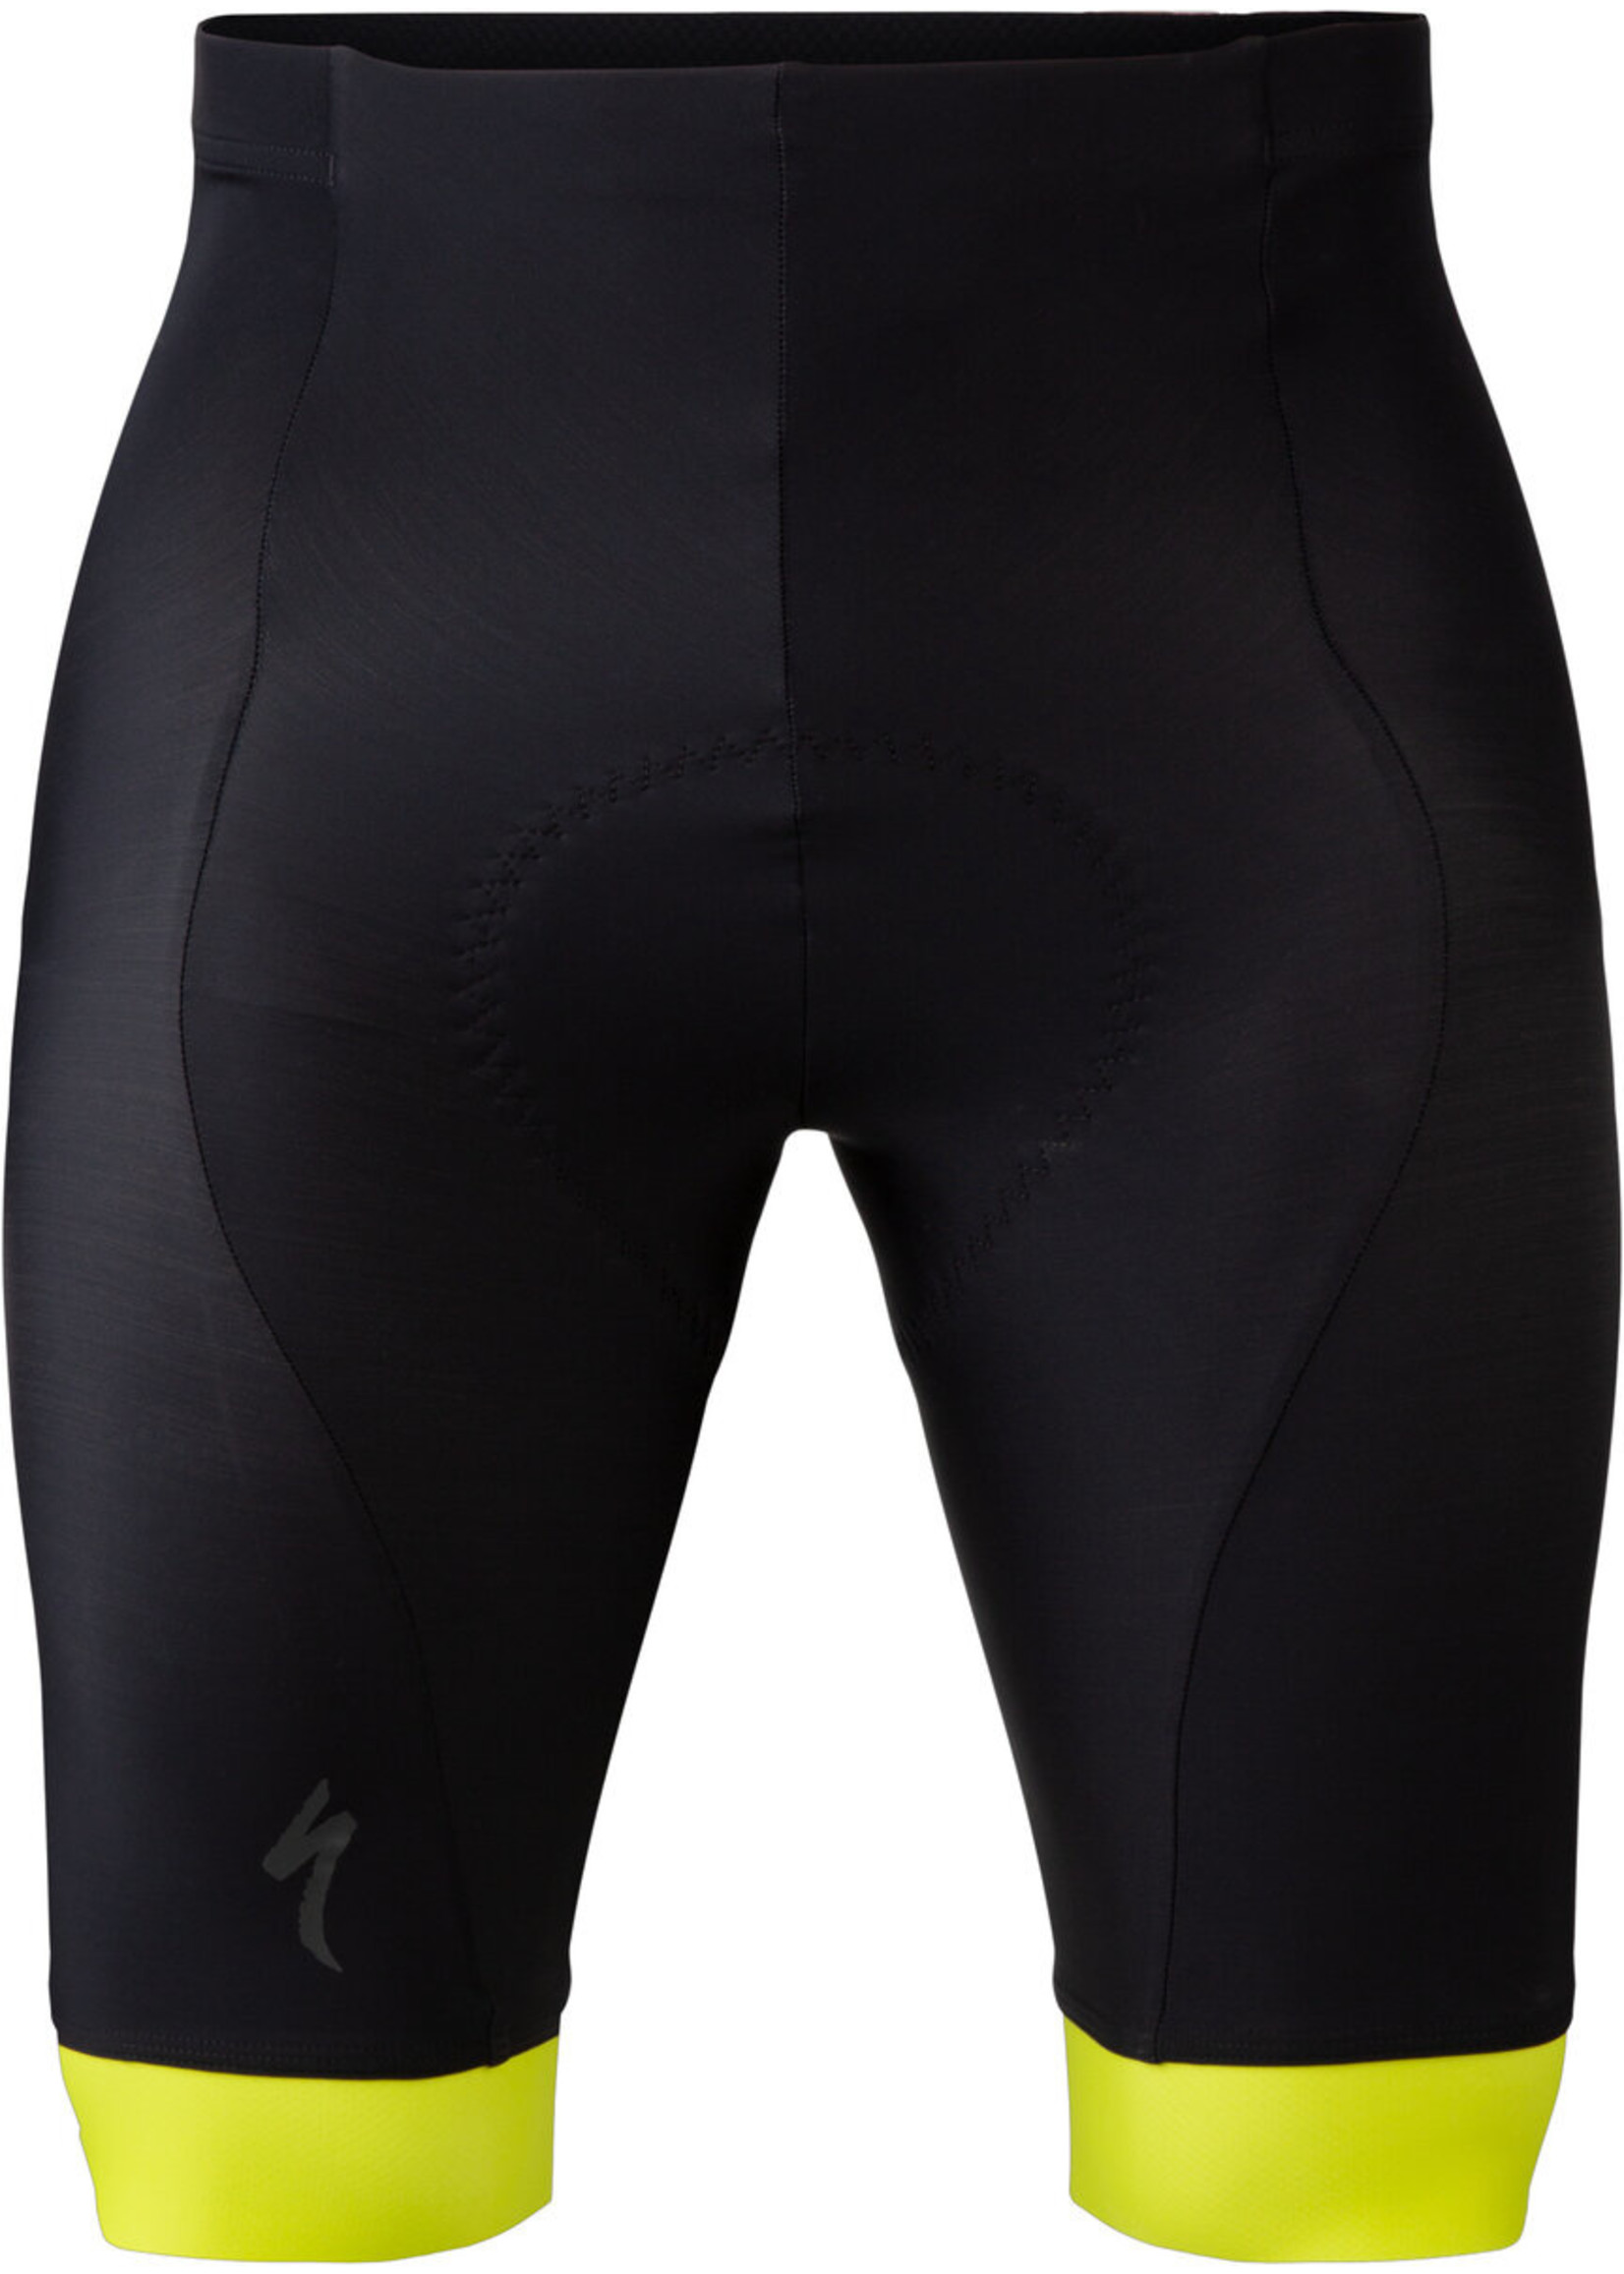 Specialized Women's RBX Short with Swat